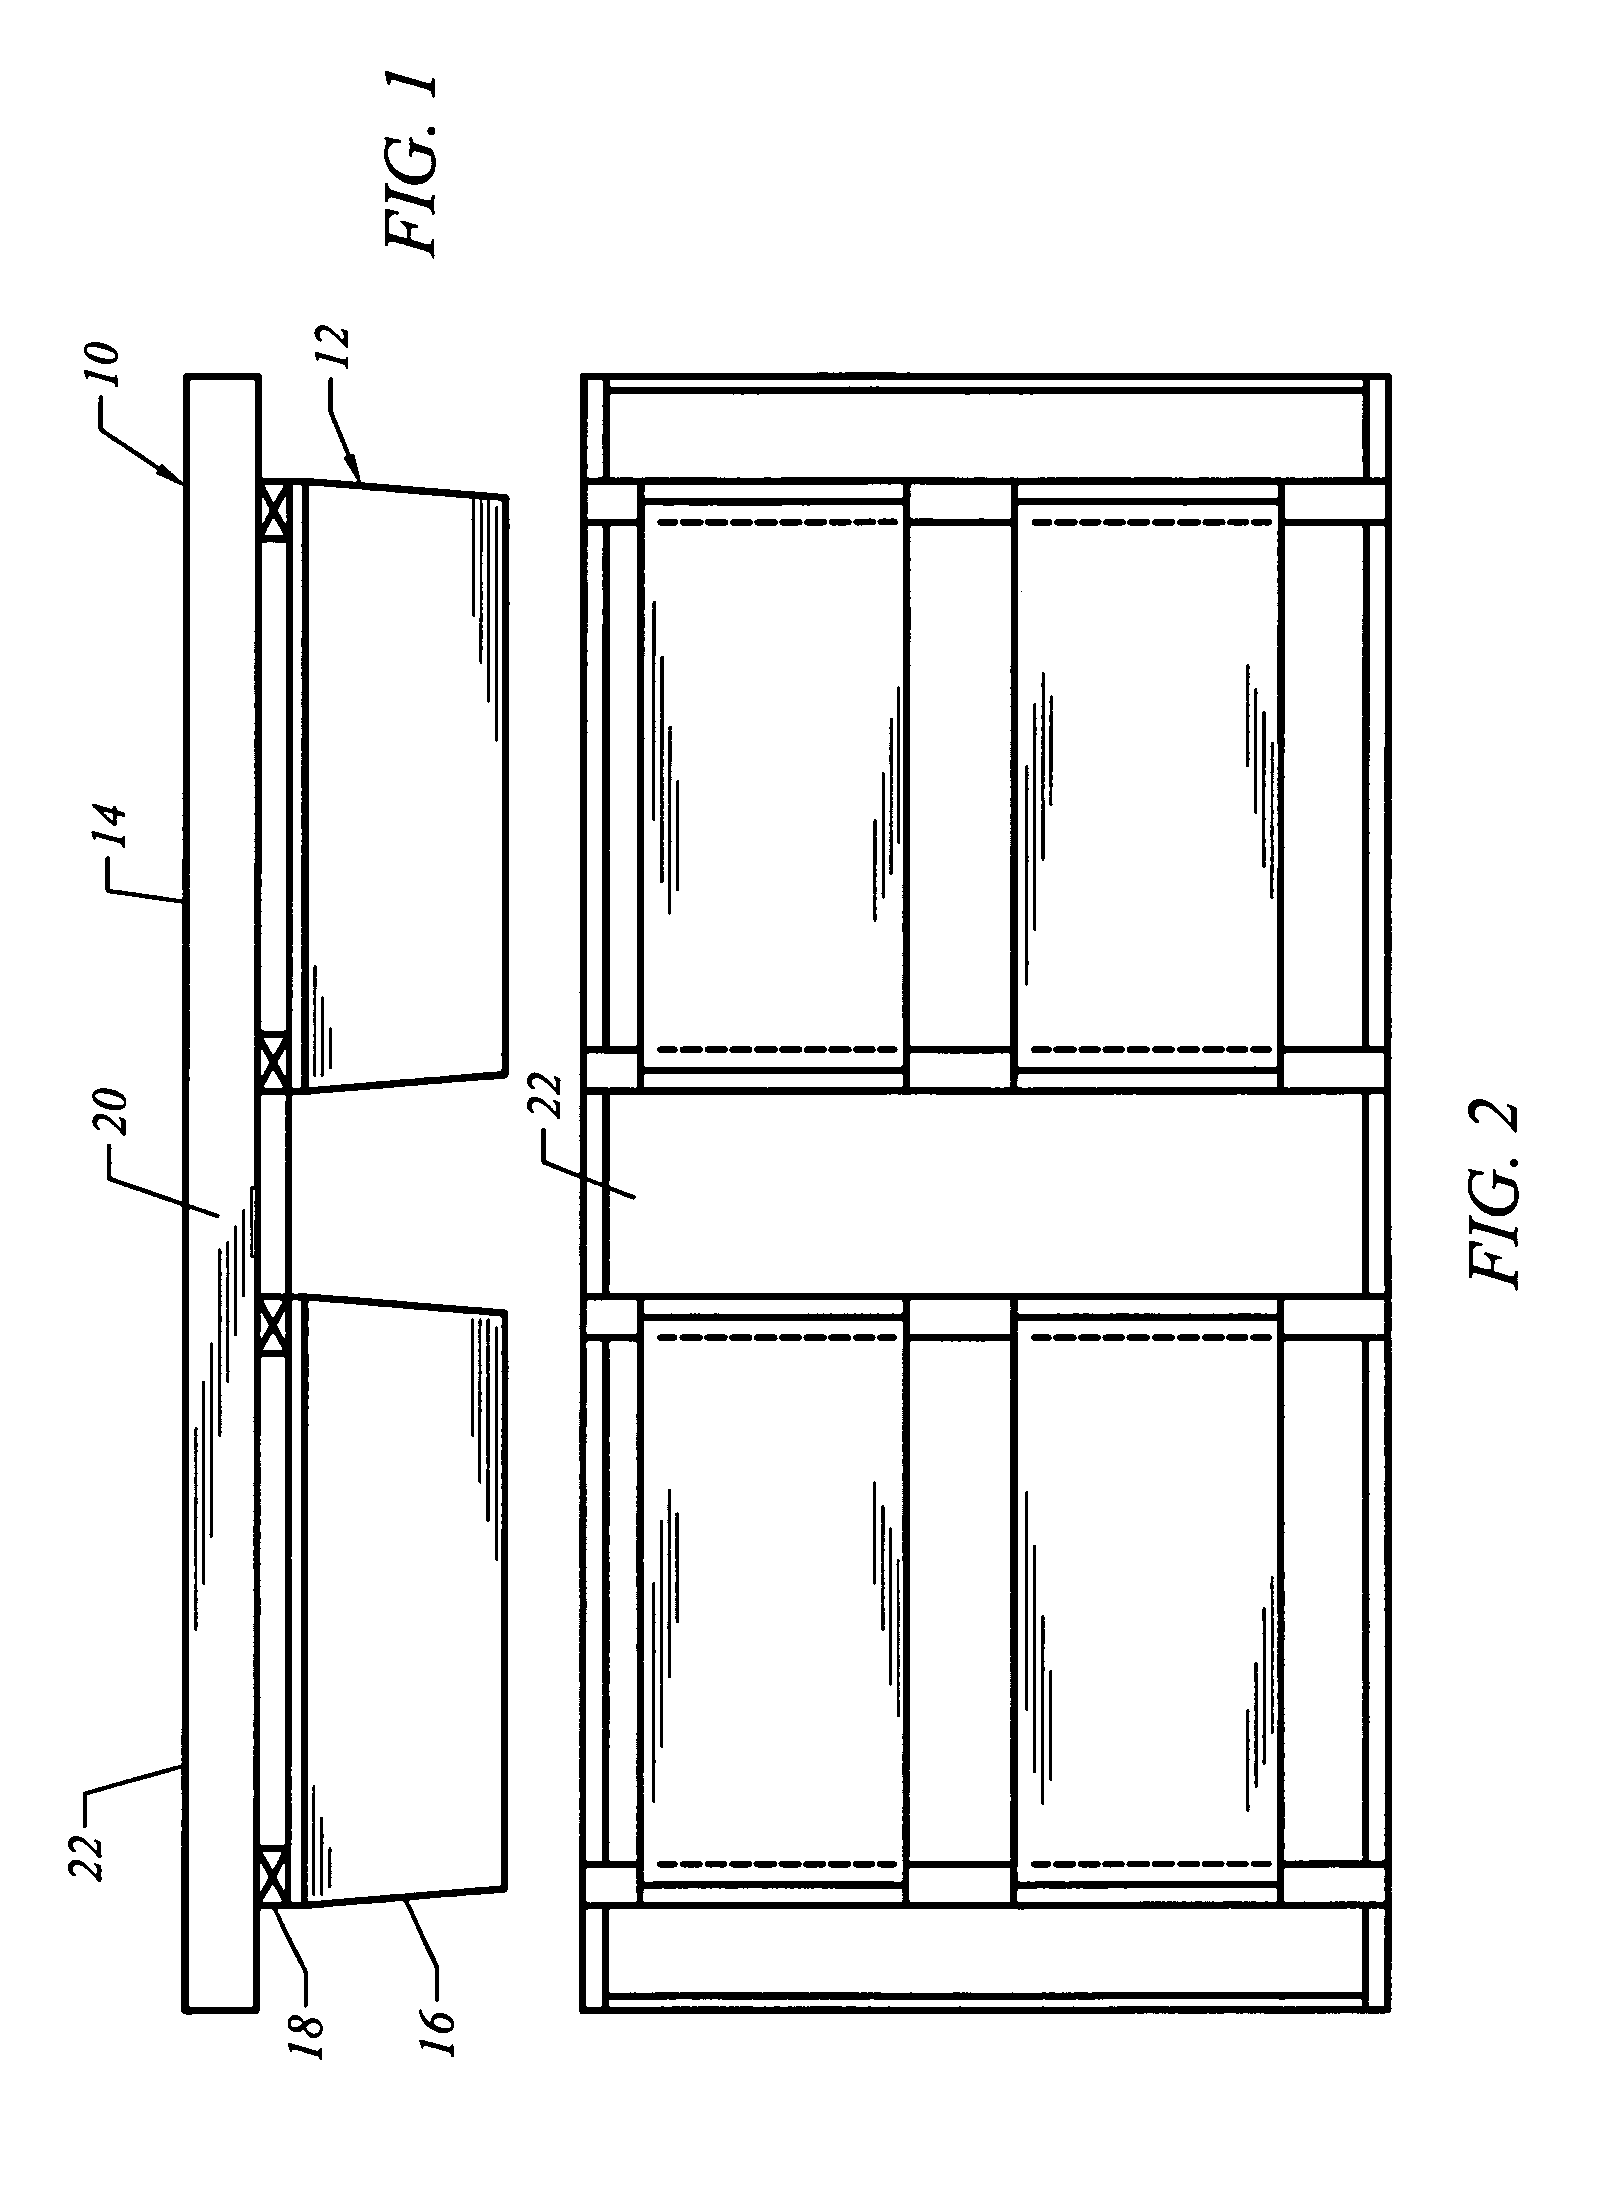 Modular floating dock frame and interconnection system